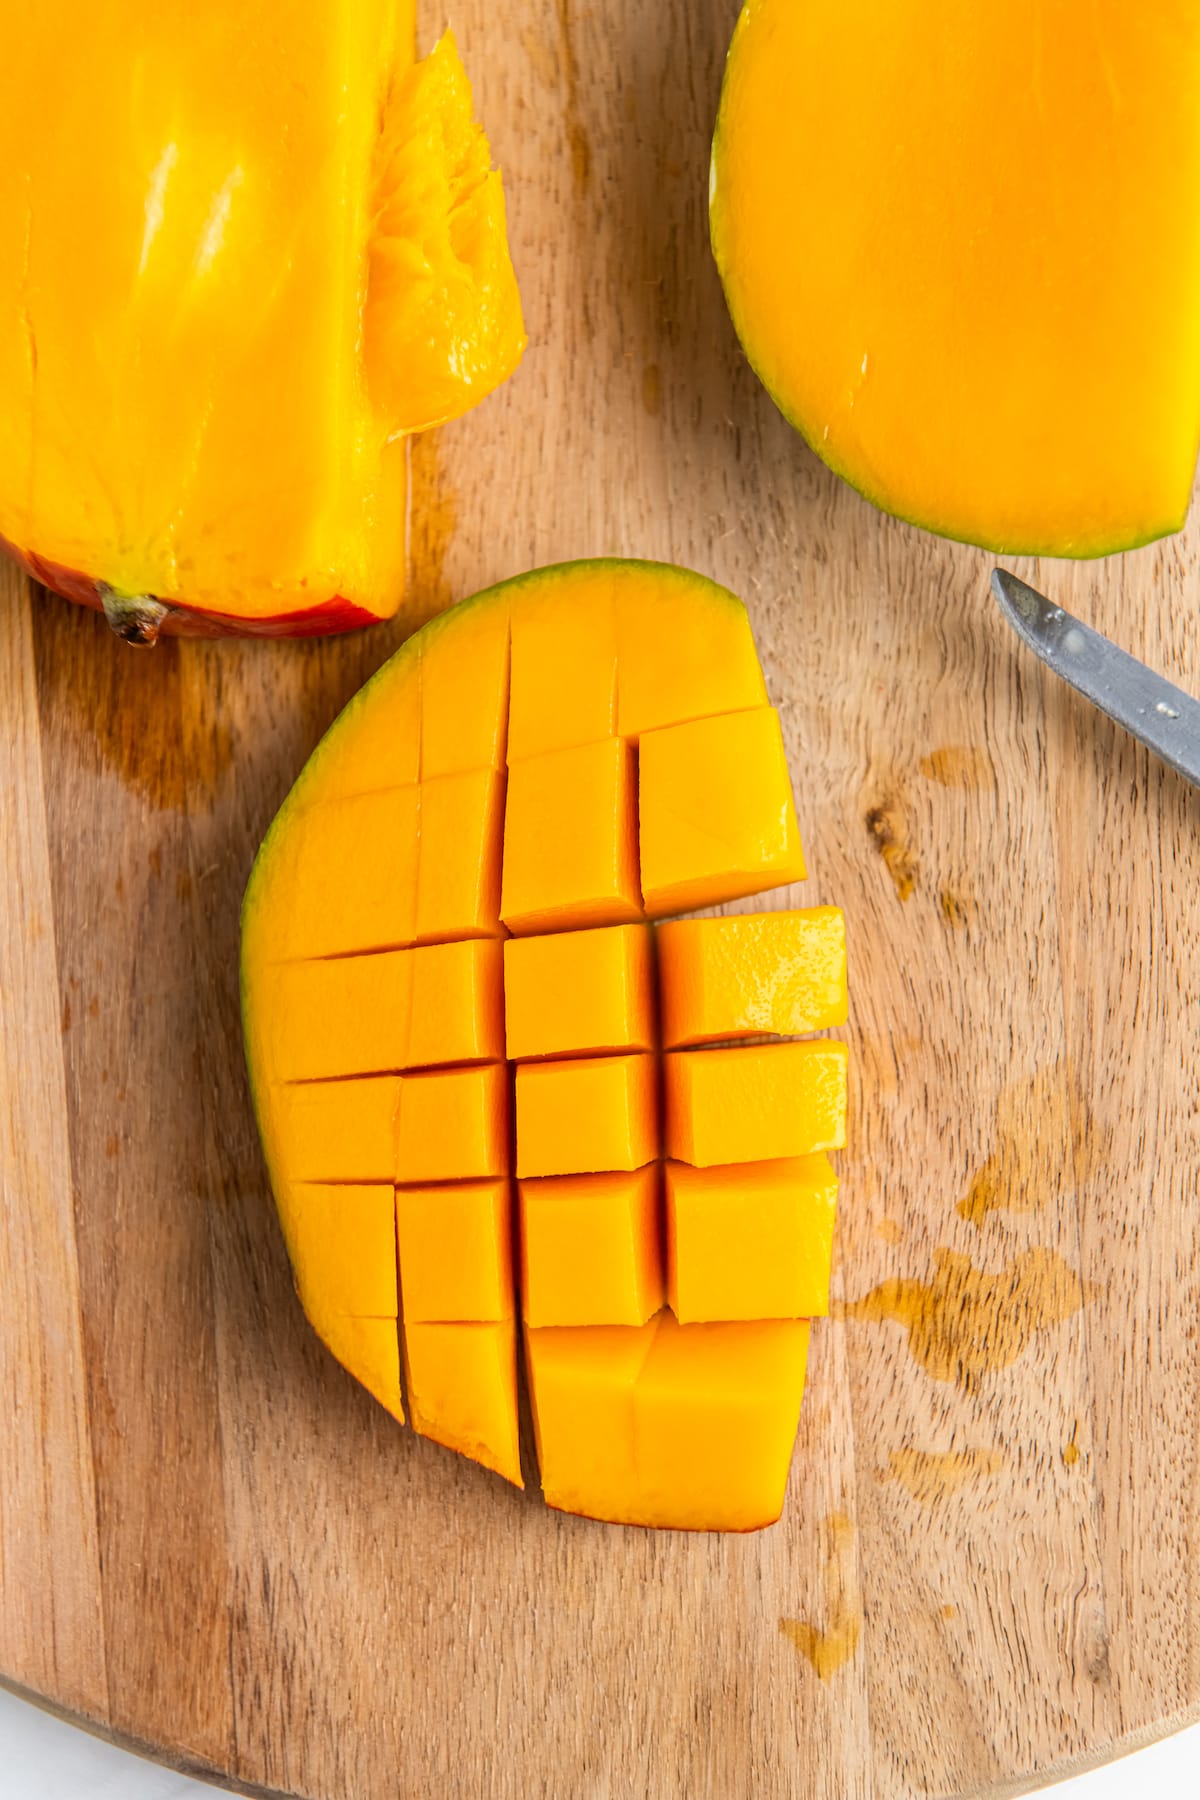 Showing how to cut a mango.